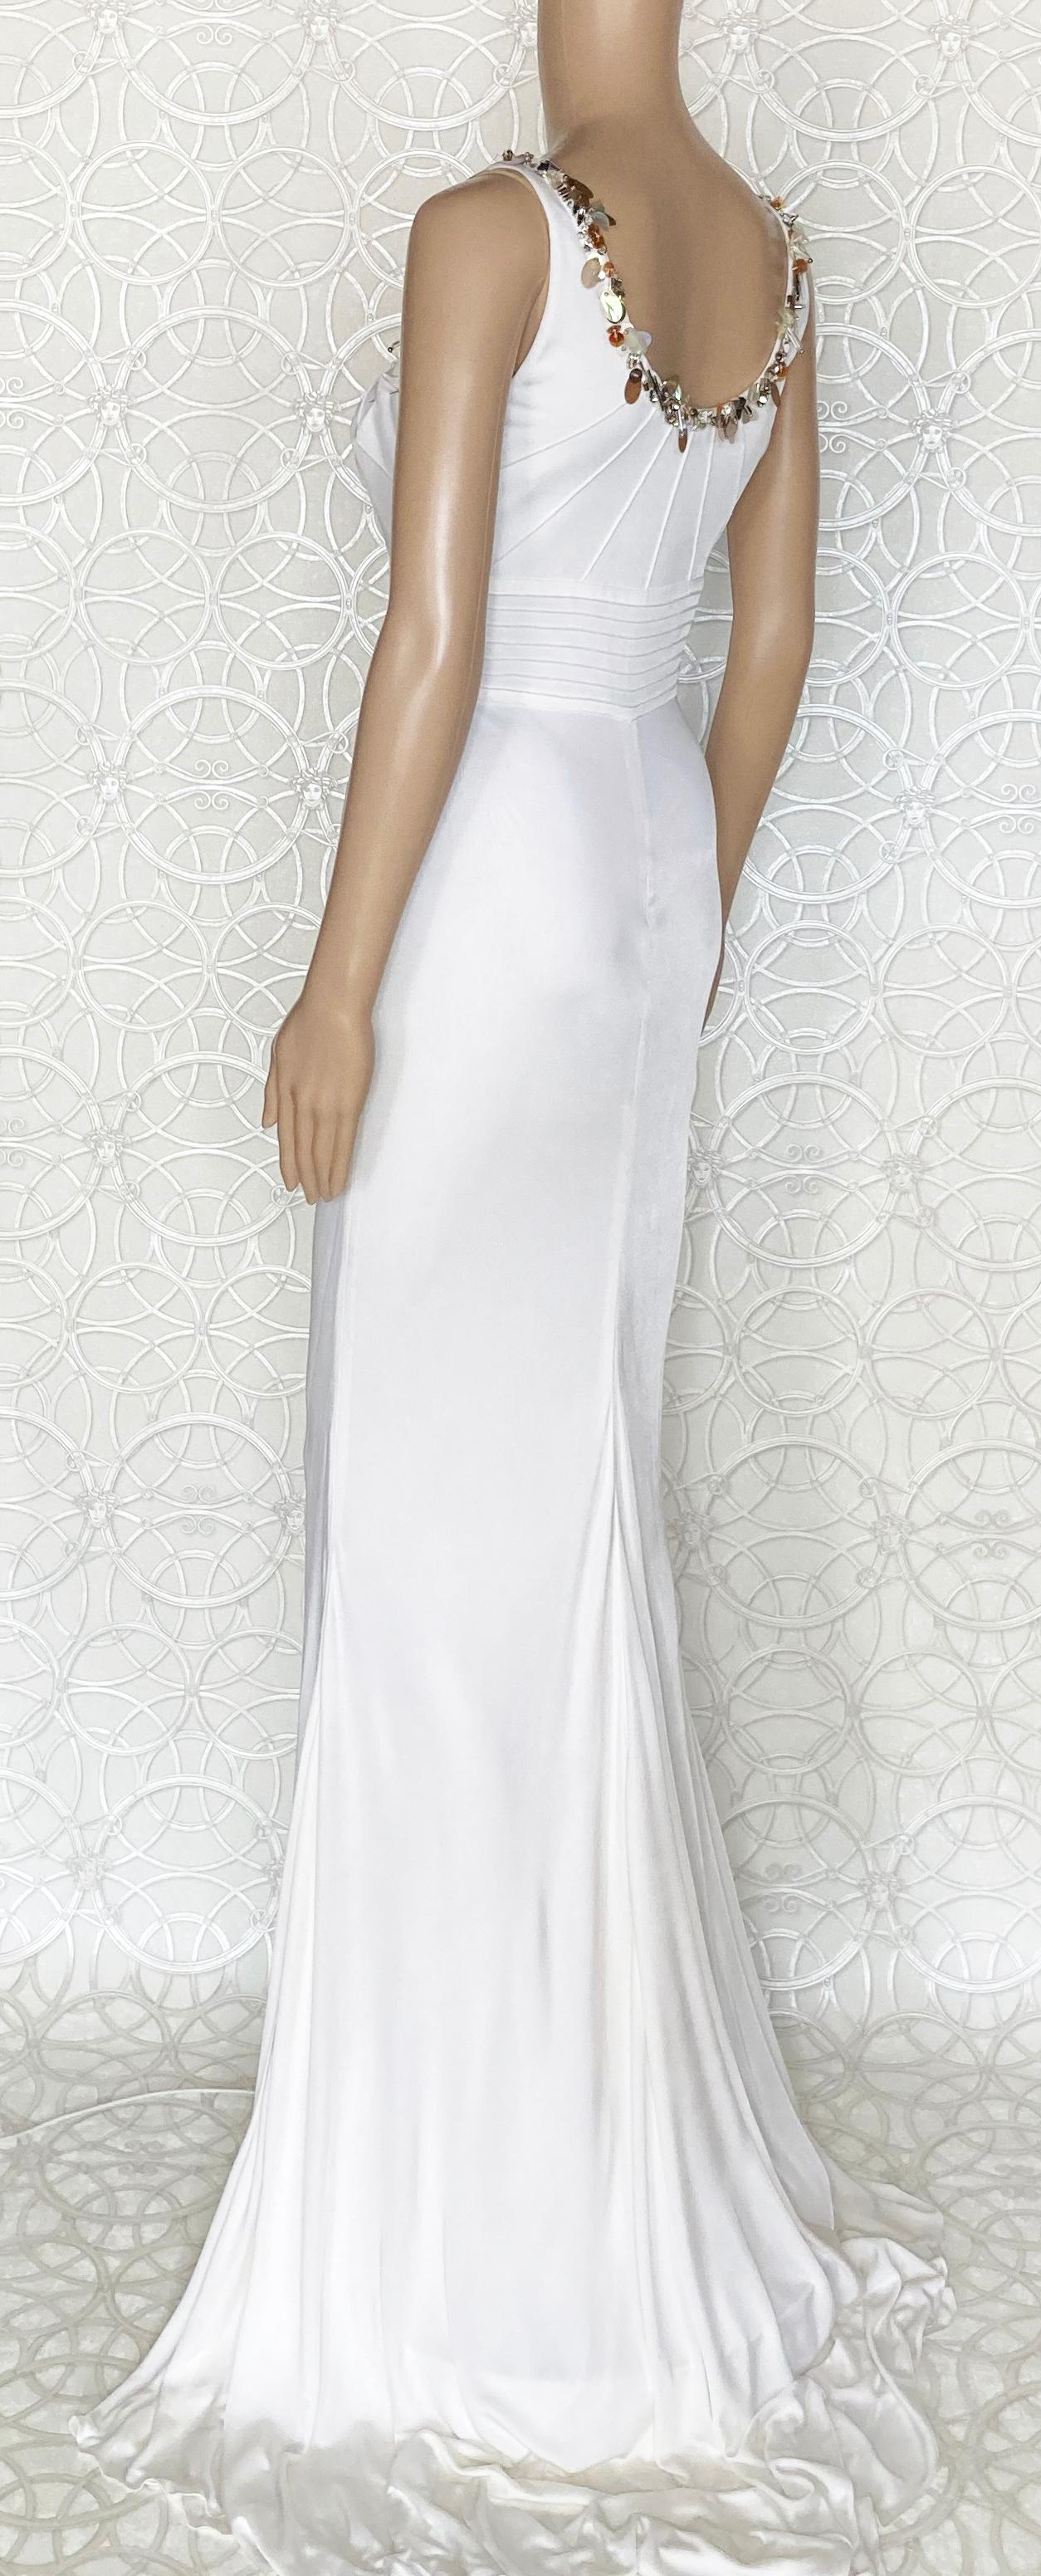 NEW VERSACE CRYSTAL EMBELLISHED WHITE LONG DRESS Gown  42 - 6 For Sale 4